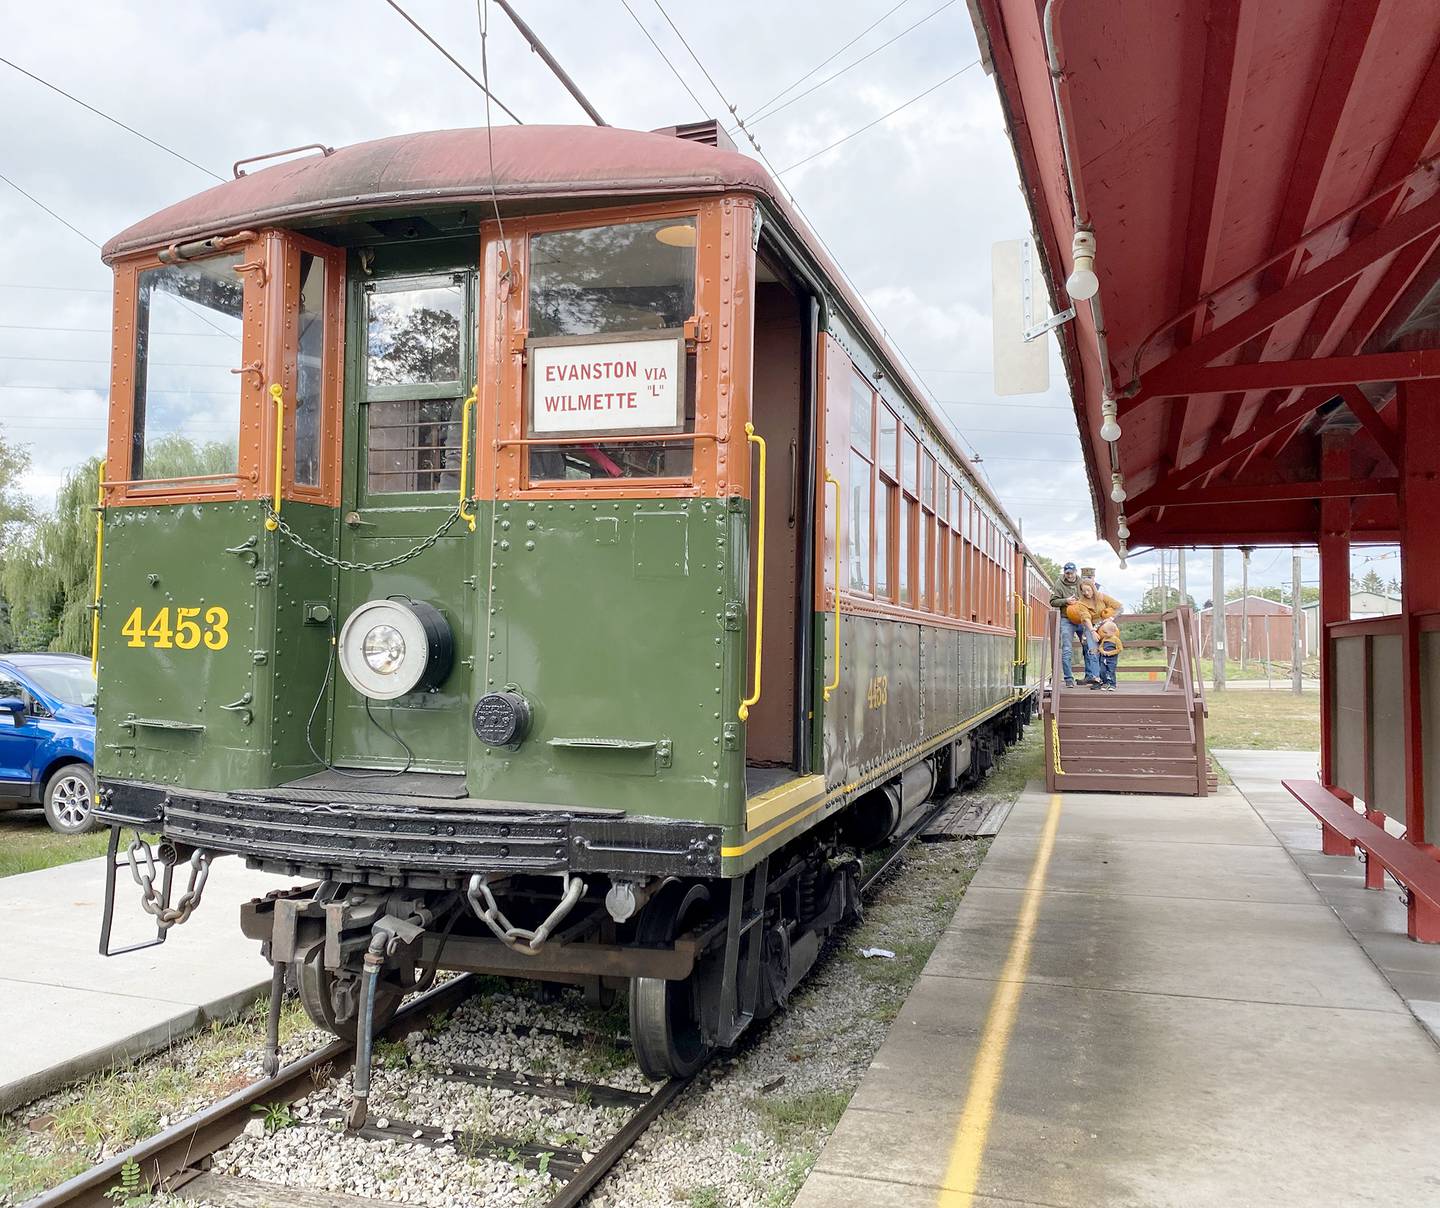 Many of the electric train cars in the East Troy Railroad Museum's fleet, such as this one built by the Cincinnati Car Co. in the 1920s, formerly operated on lines in the Chicago area. Now, they transport riders to the Elegant Farmer, 1545 Main St. in Mukwonago, Wis., for pumpkin and apple picking.